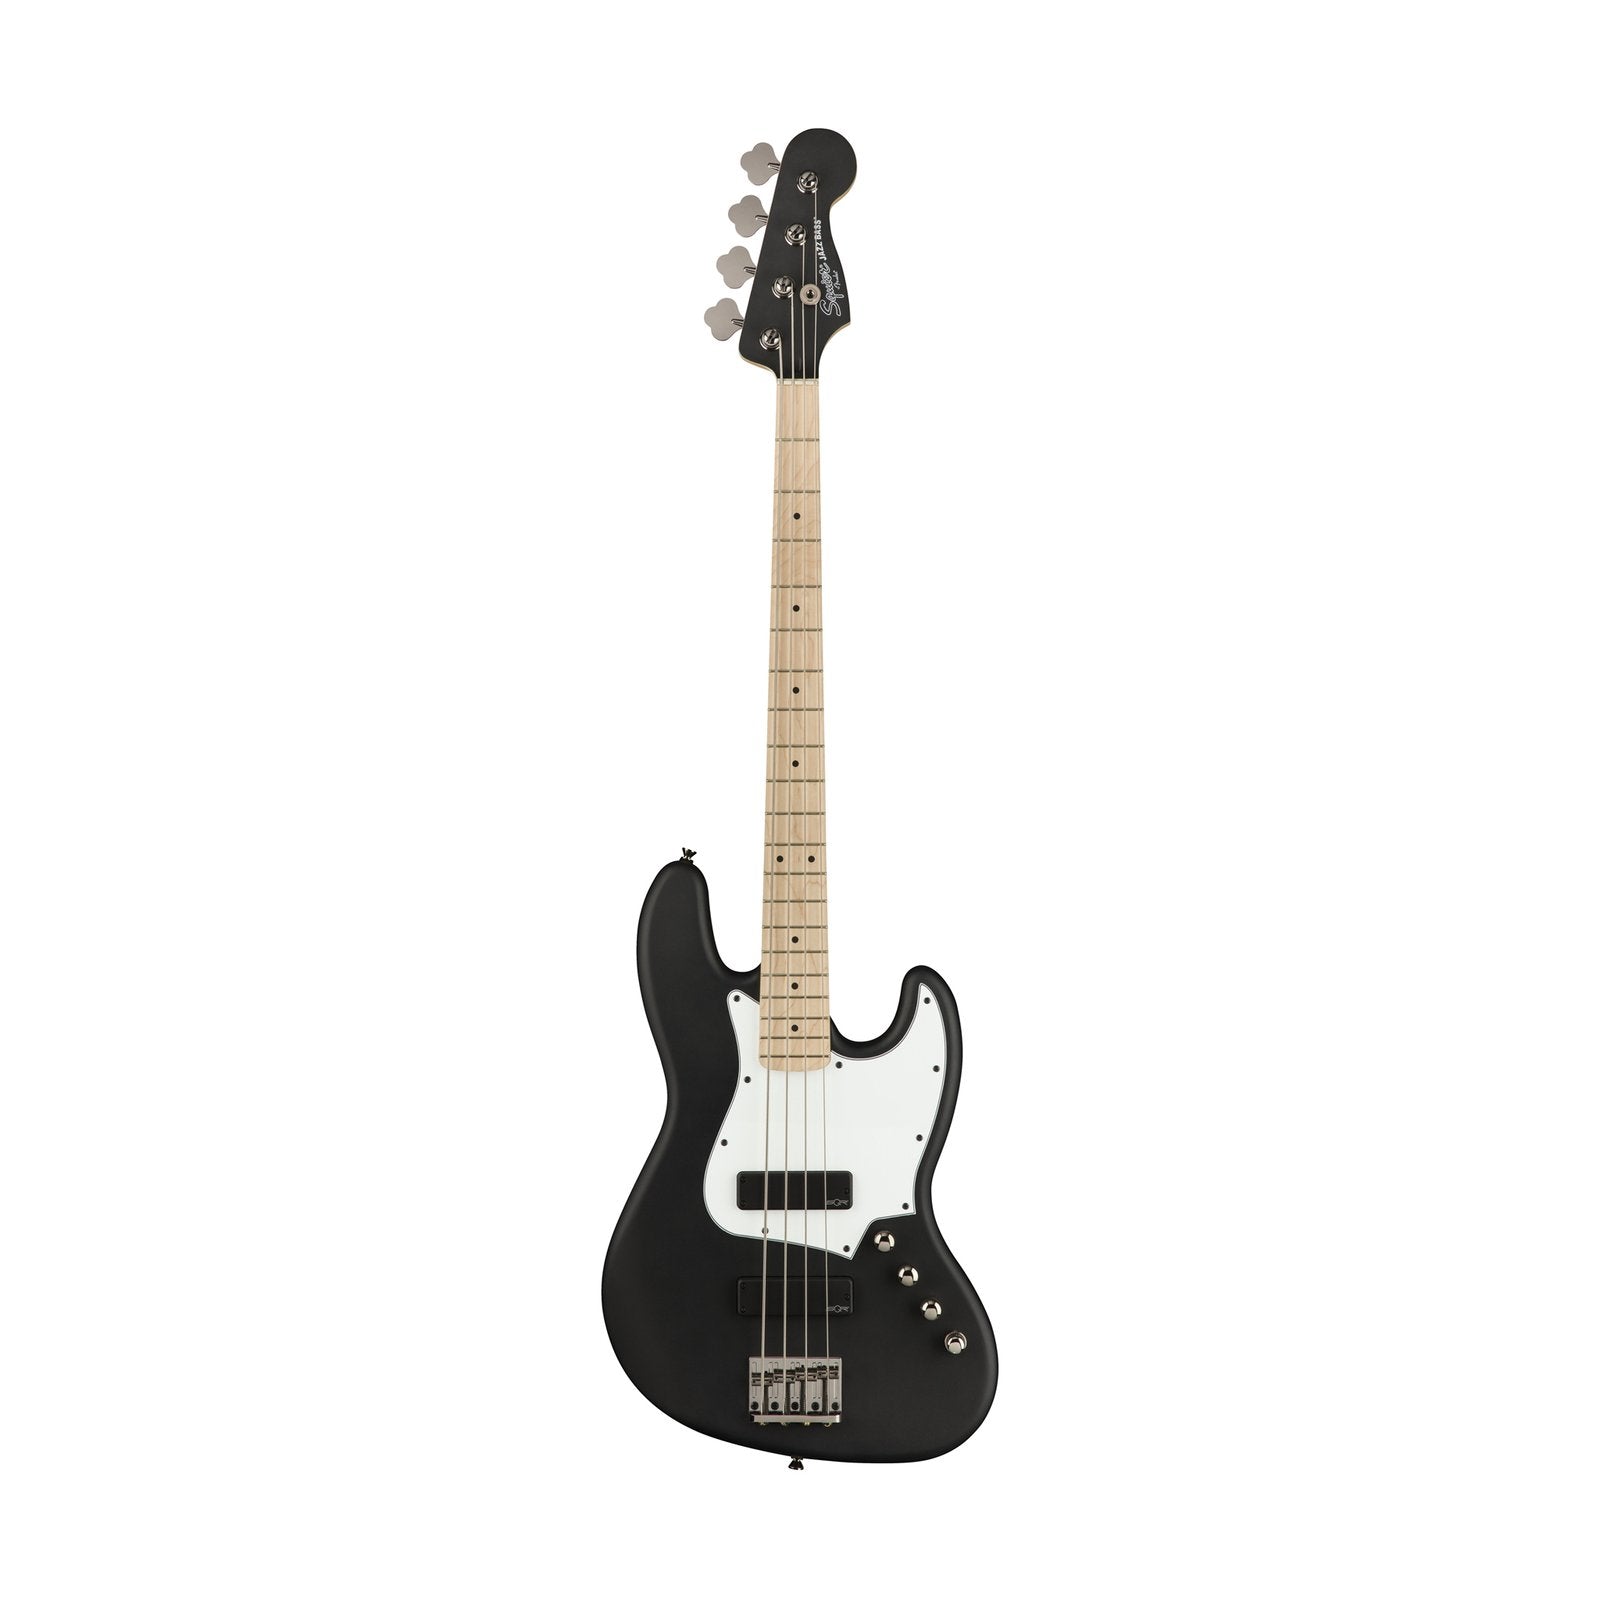 Squier Contemporary Active Jazz Bass HH Guitar, Maple FB, Flat Black, SQUIER BY FENDER, BASS GUITAR, squier-by-fender-bass-guitar-037-0450-510, ZOSO MUSIC SDN BHD